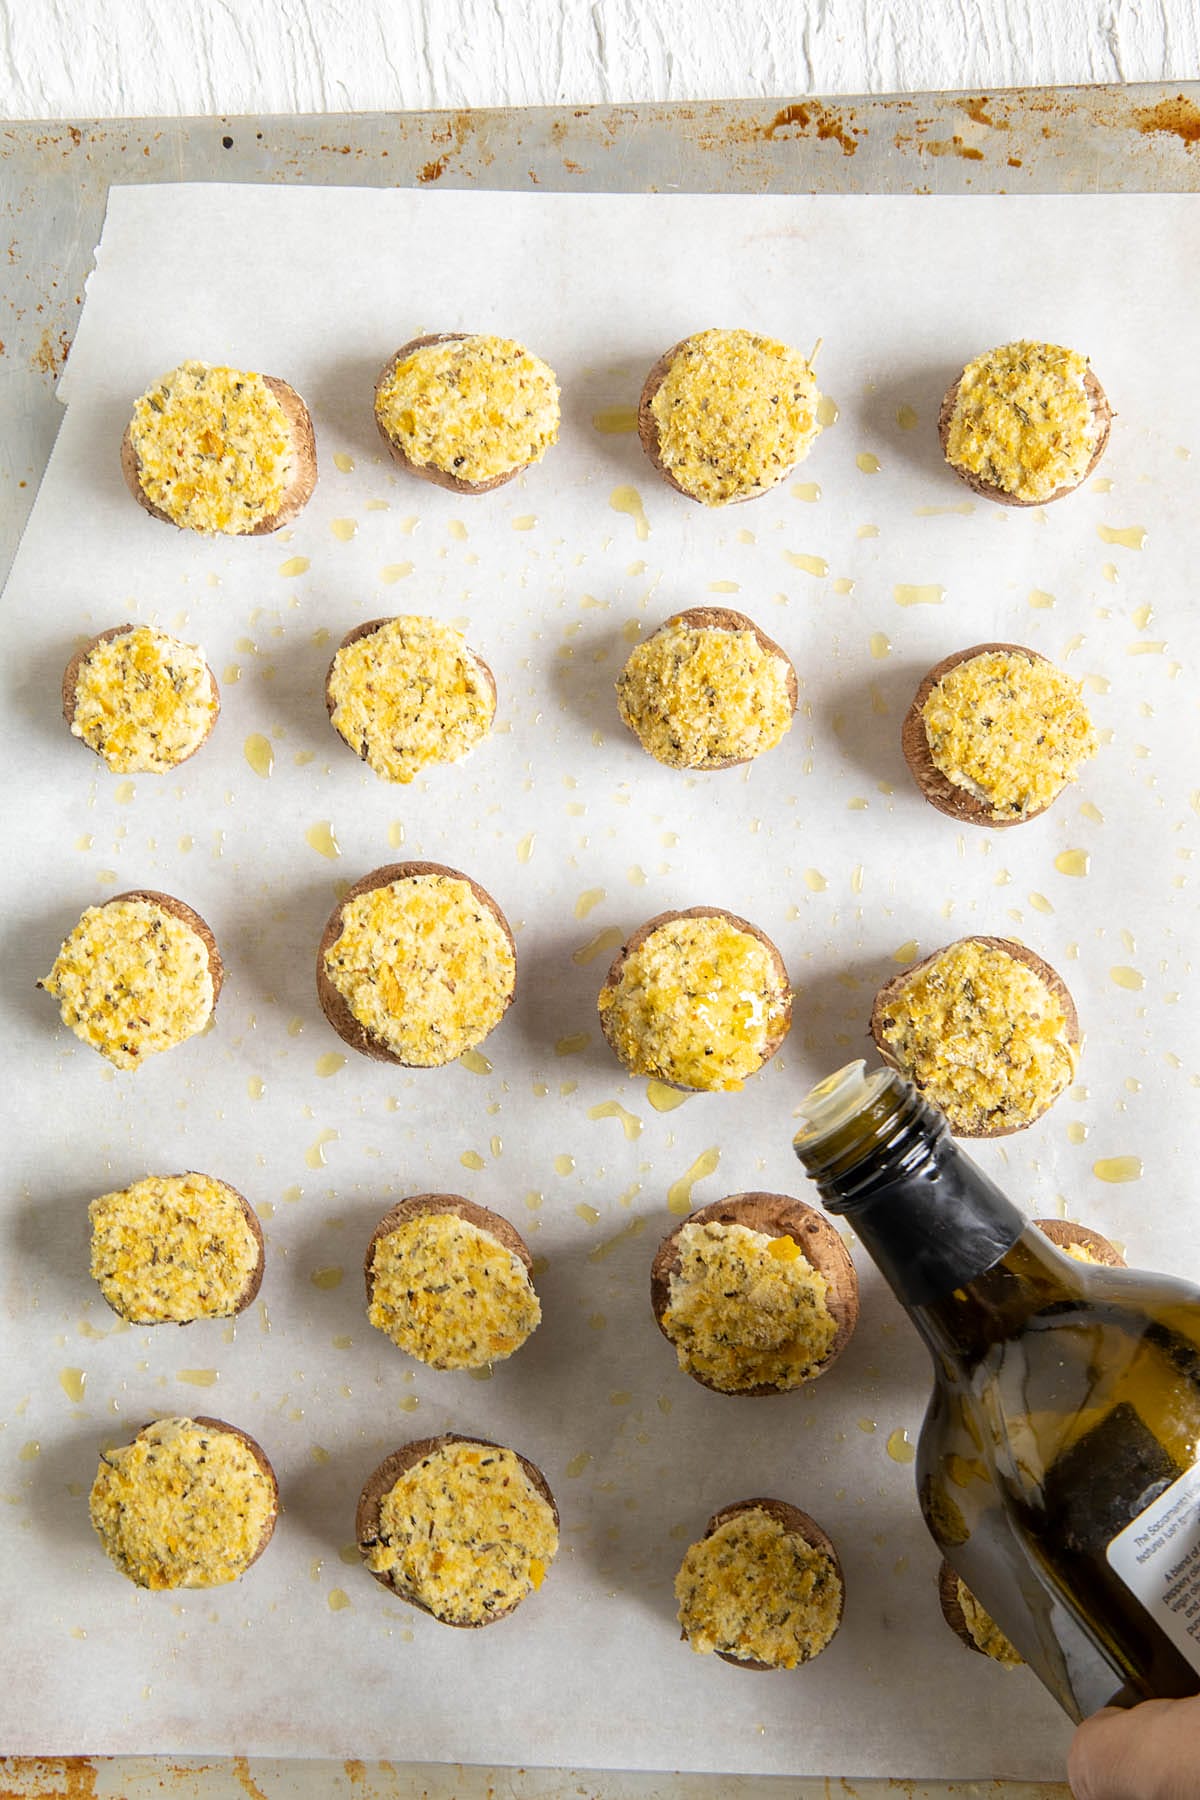 Olive oil being drizzled over stuffed and breaded mushrooms on a prepared baking sheet with oiled parchment paper.